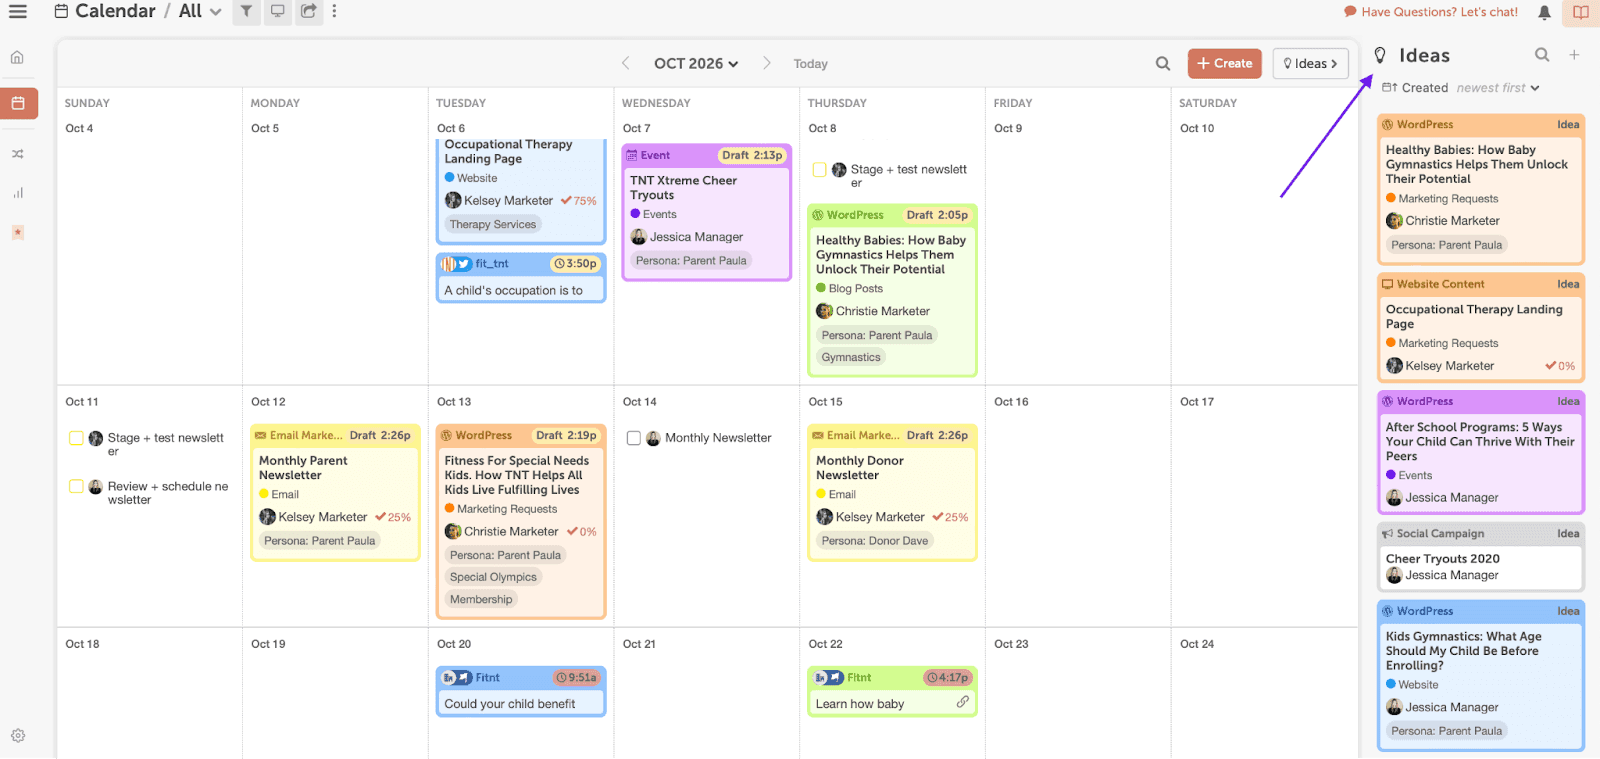 CoSchedule Calendar view with ideas tab